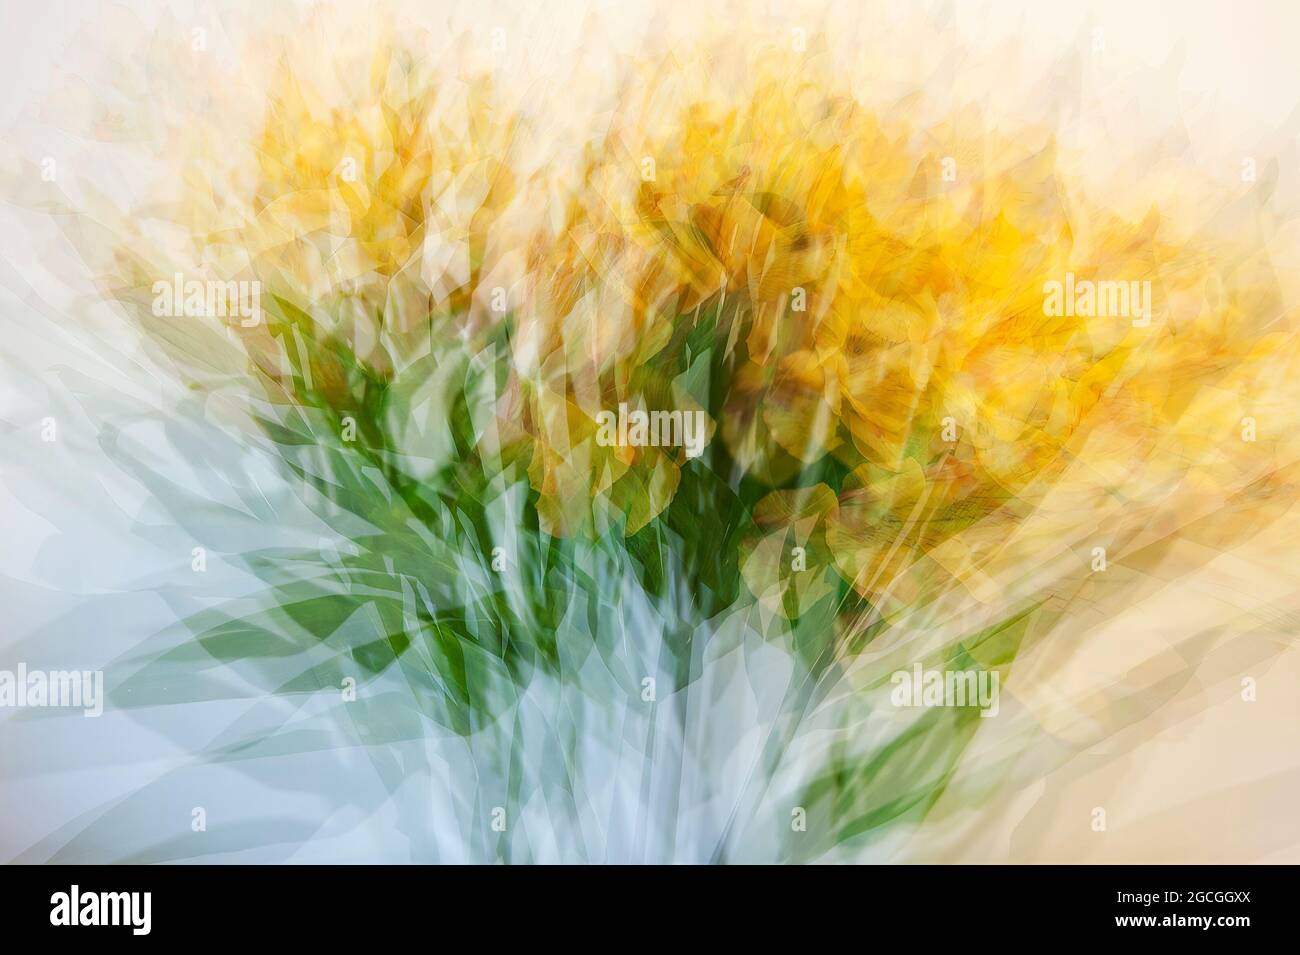 Flower abstraction - multiple exposure Stock Photo